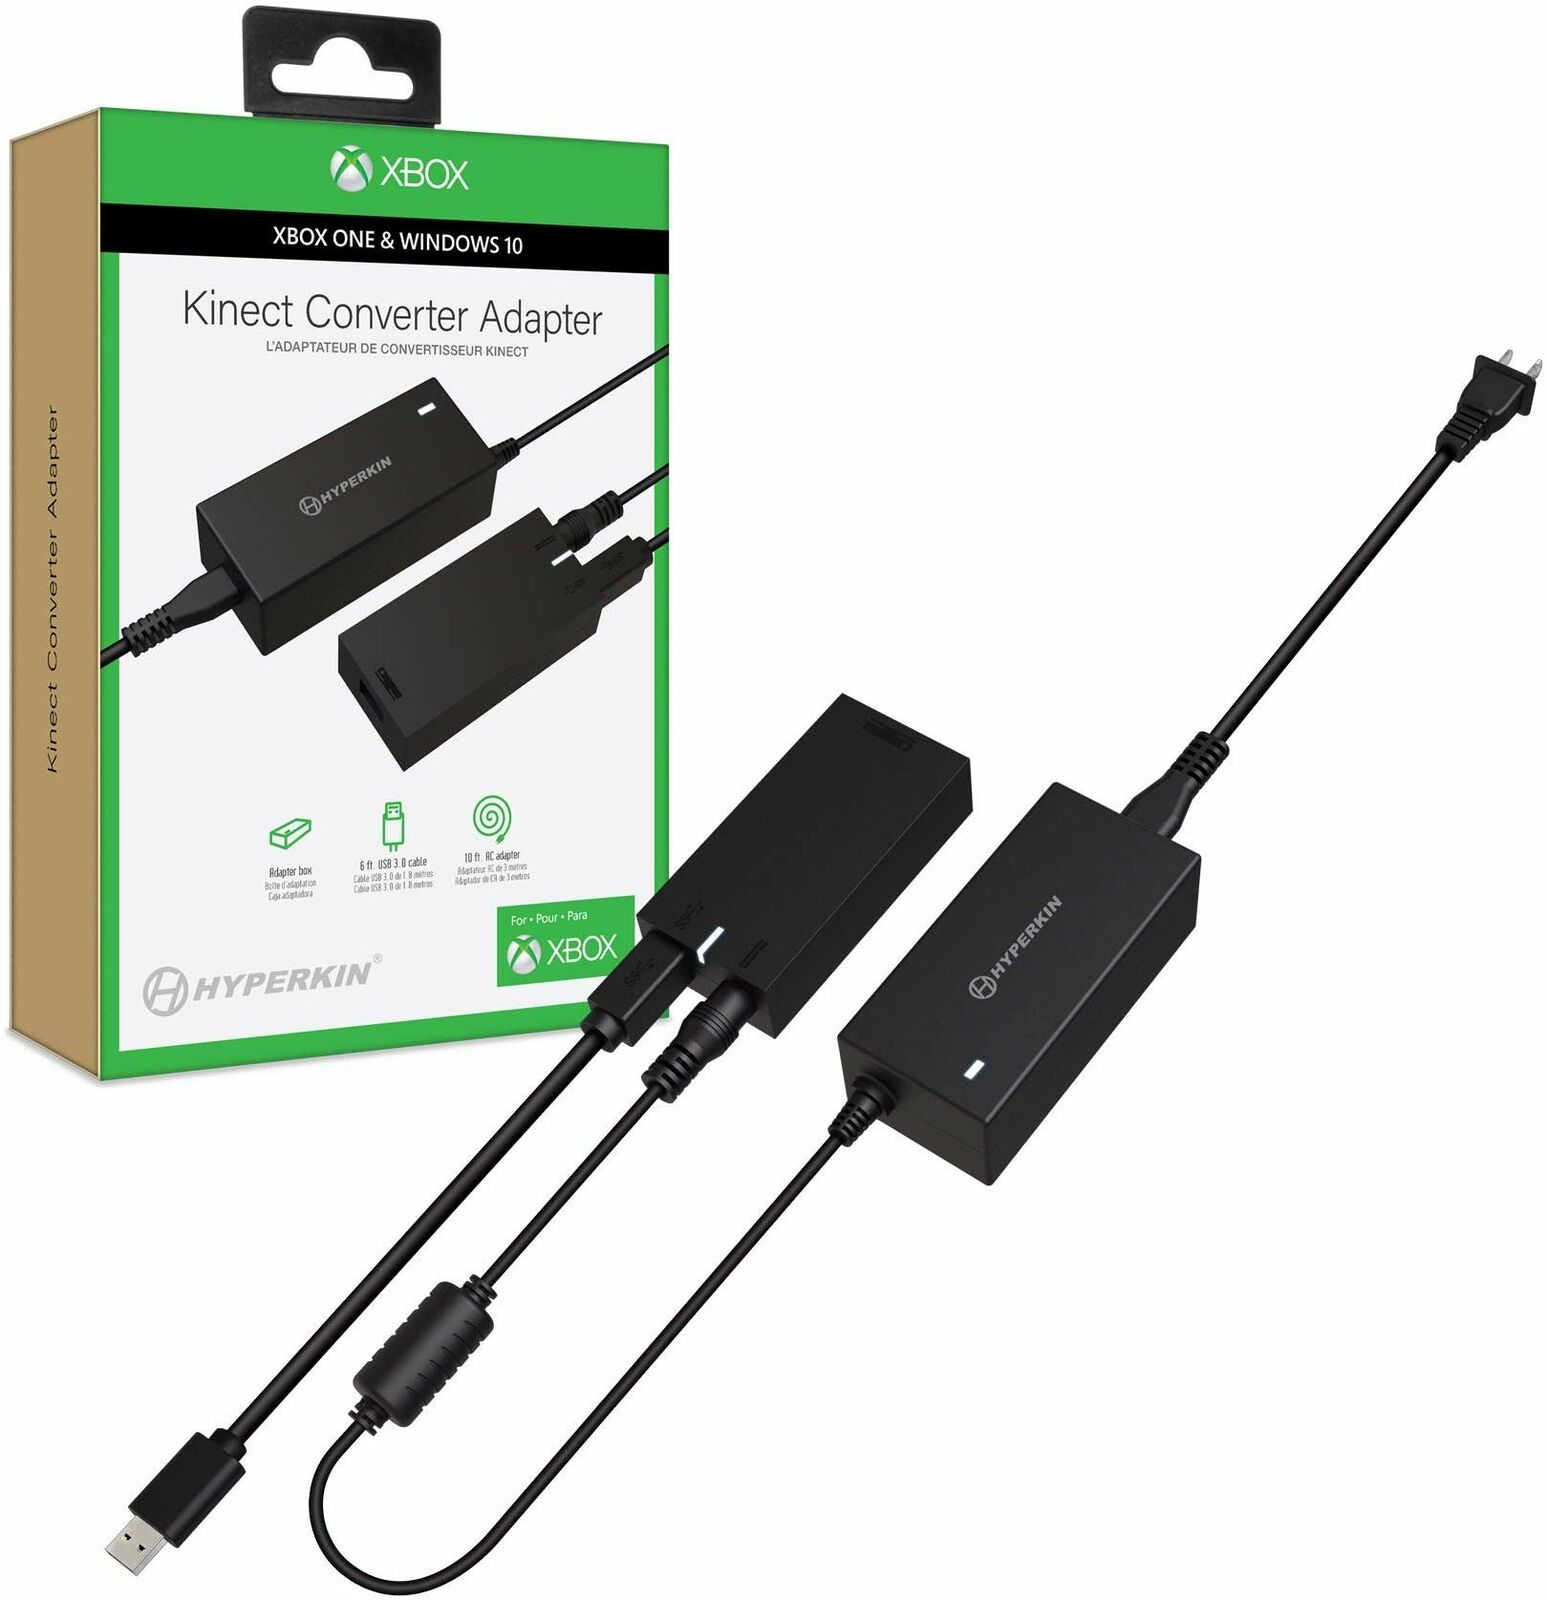 Retentie creatief Prelude Hyperkin Kinect Converter Adapter for Xbox One S, Xbox One X, and Windows  10 PCs 810007710952 | eBay